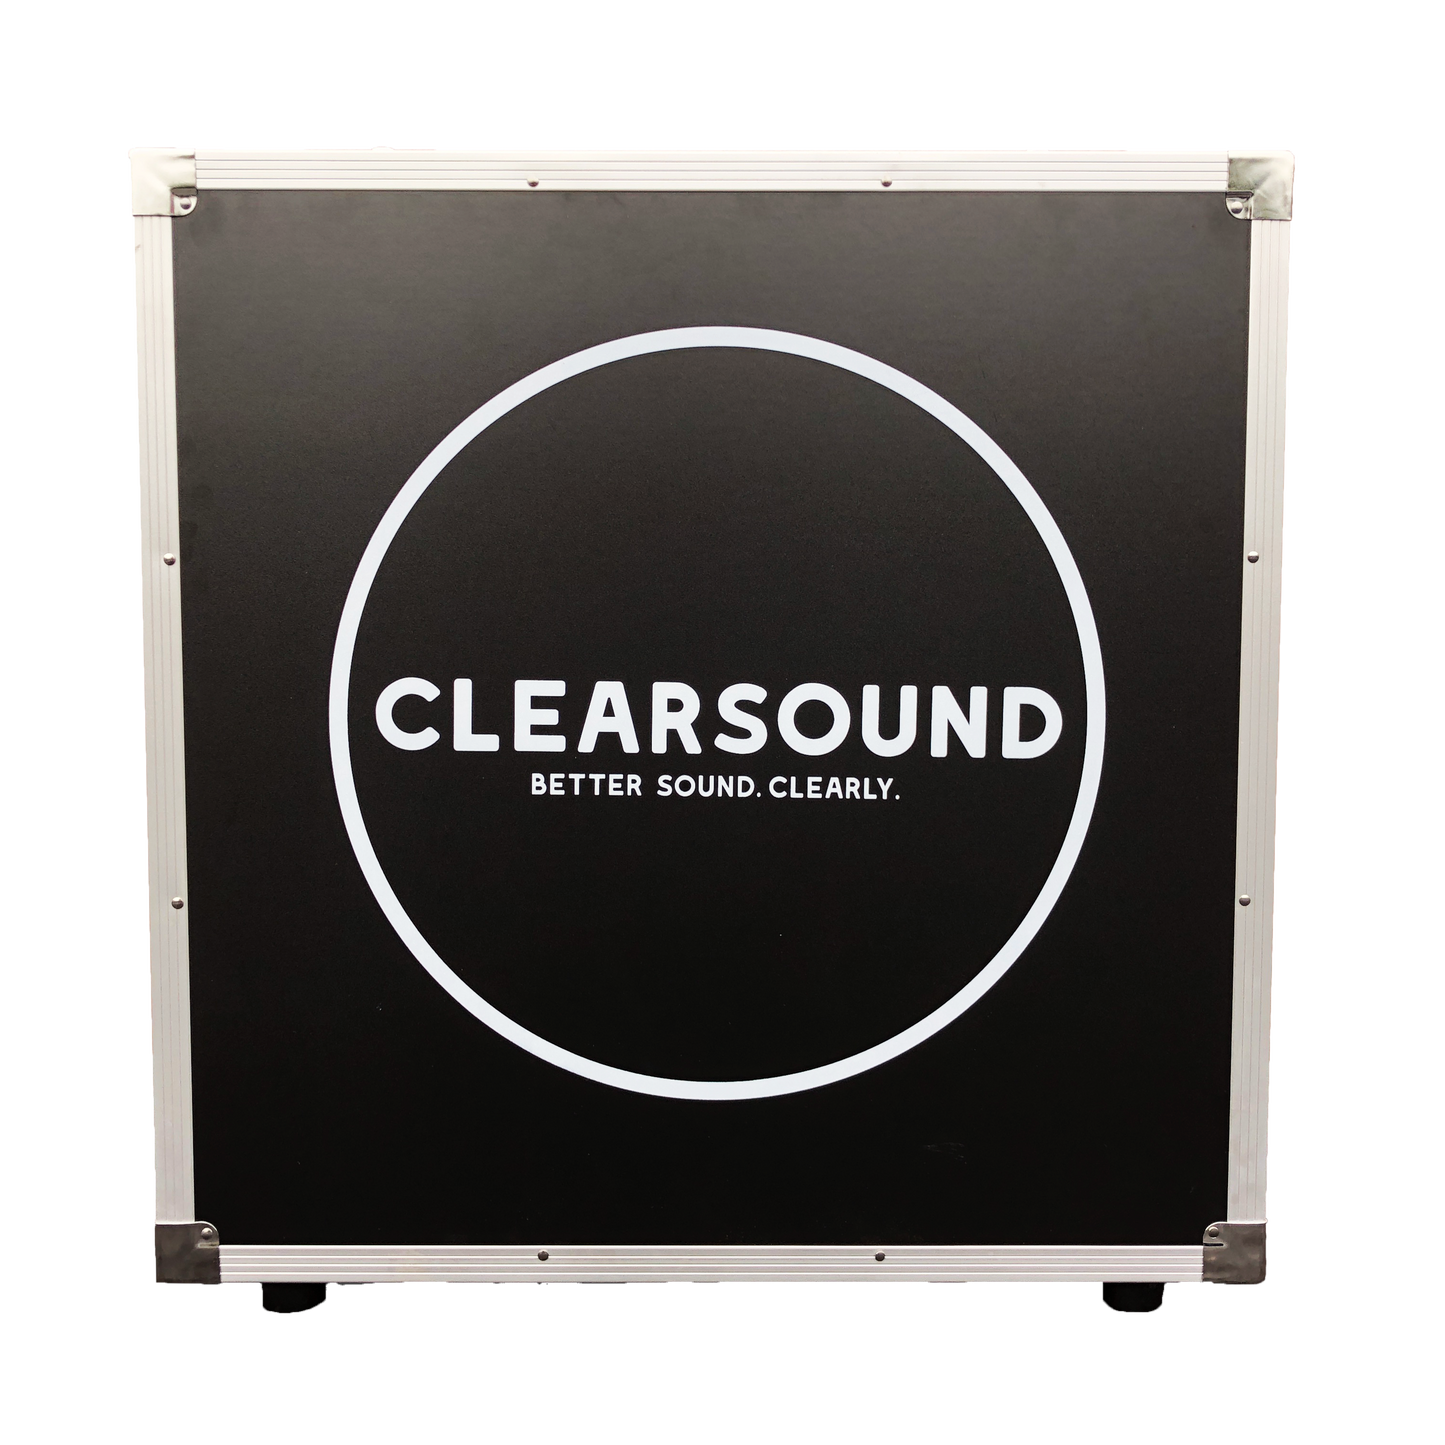 The Clearsound Vault Case